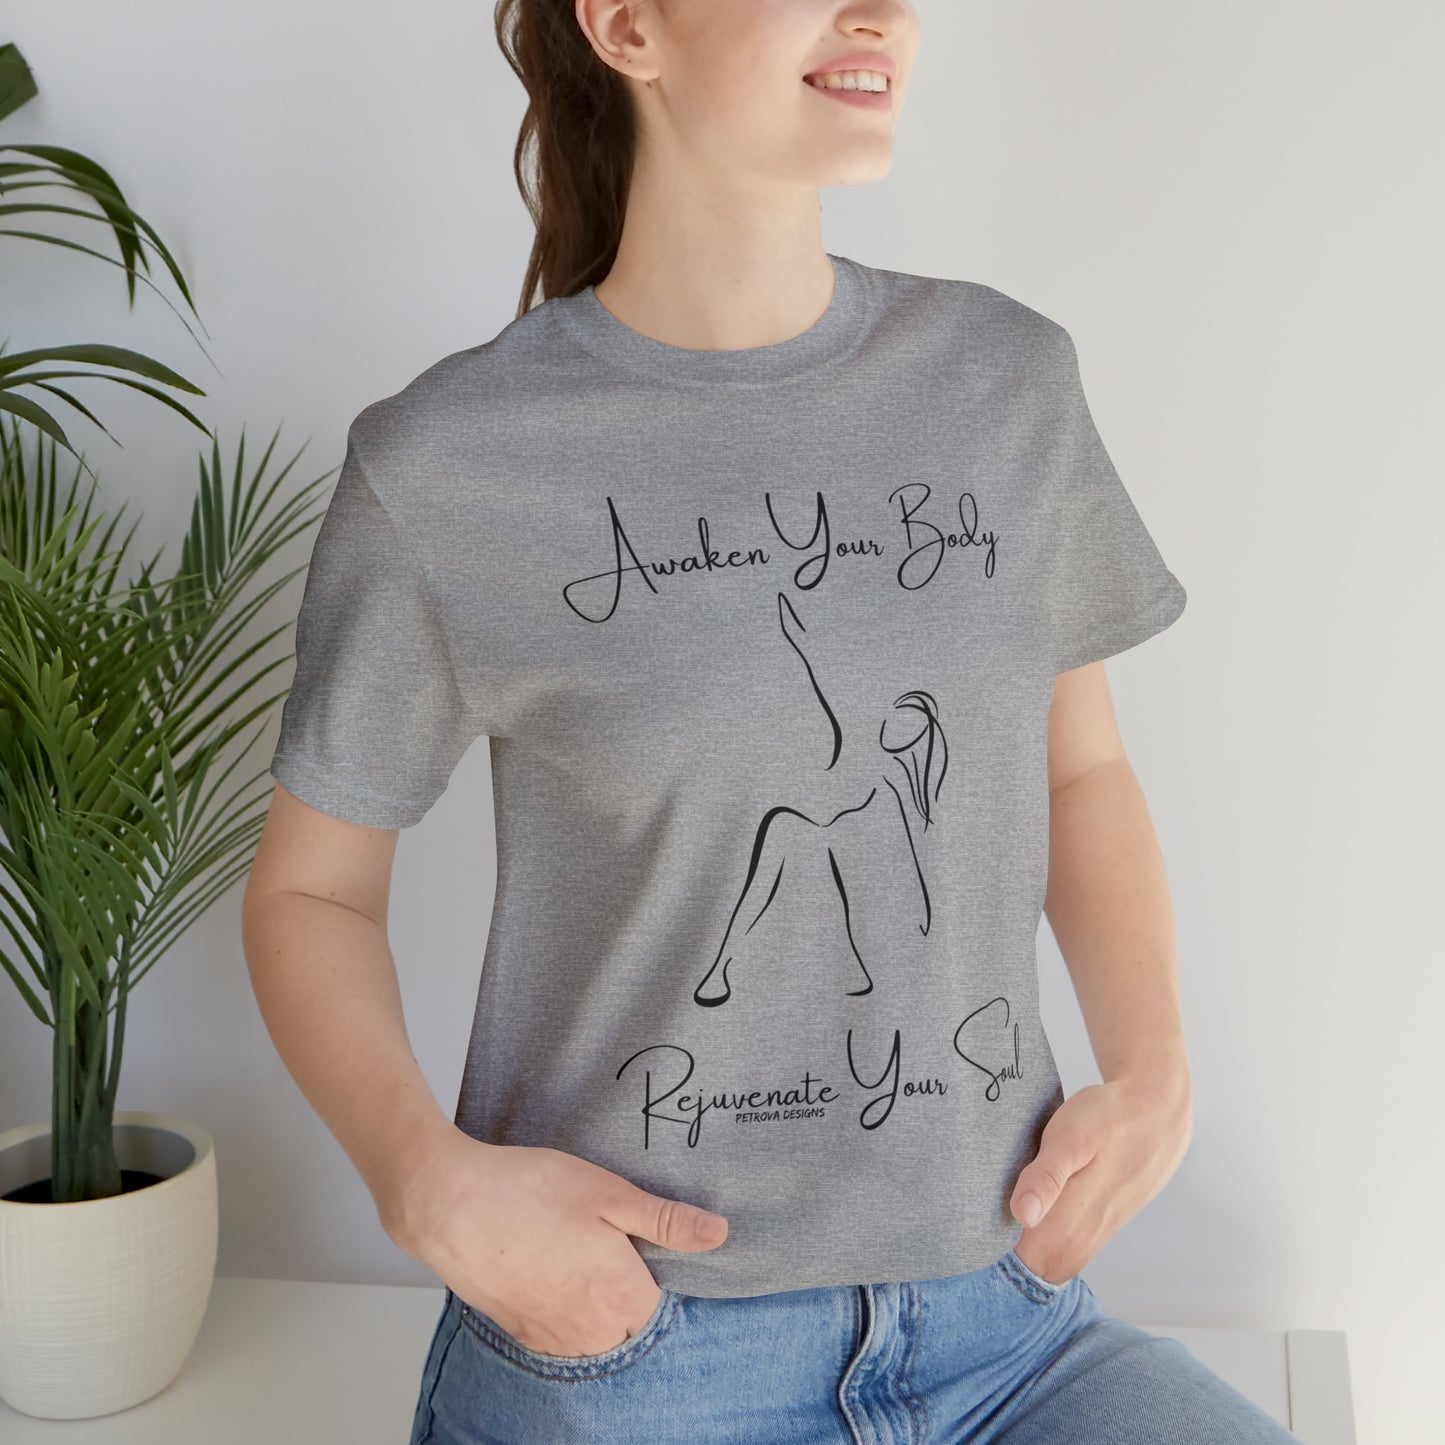 Athletic Heather T-Shirt Tshirt Design Gift for Friend and Family Short Sleeved Shirt Yoga Petrova Designs